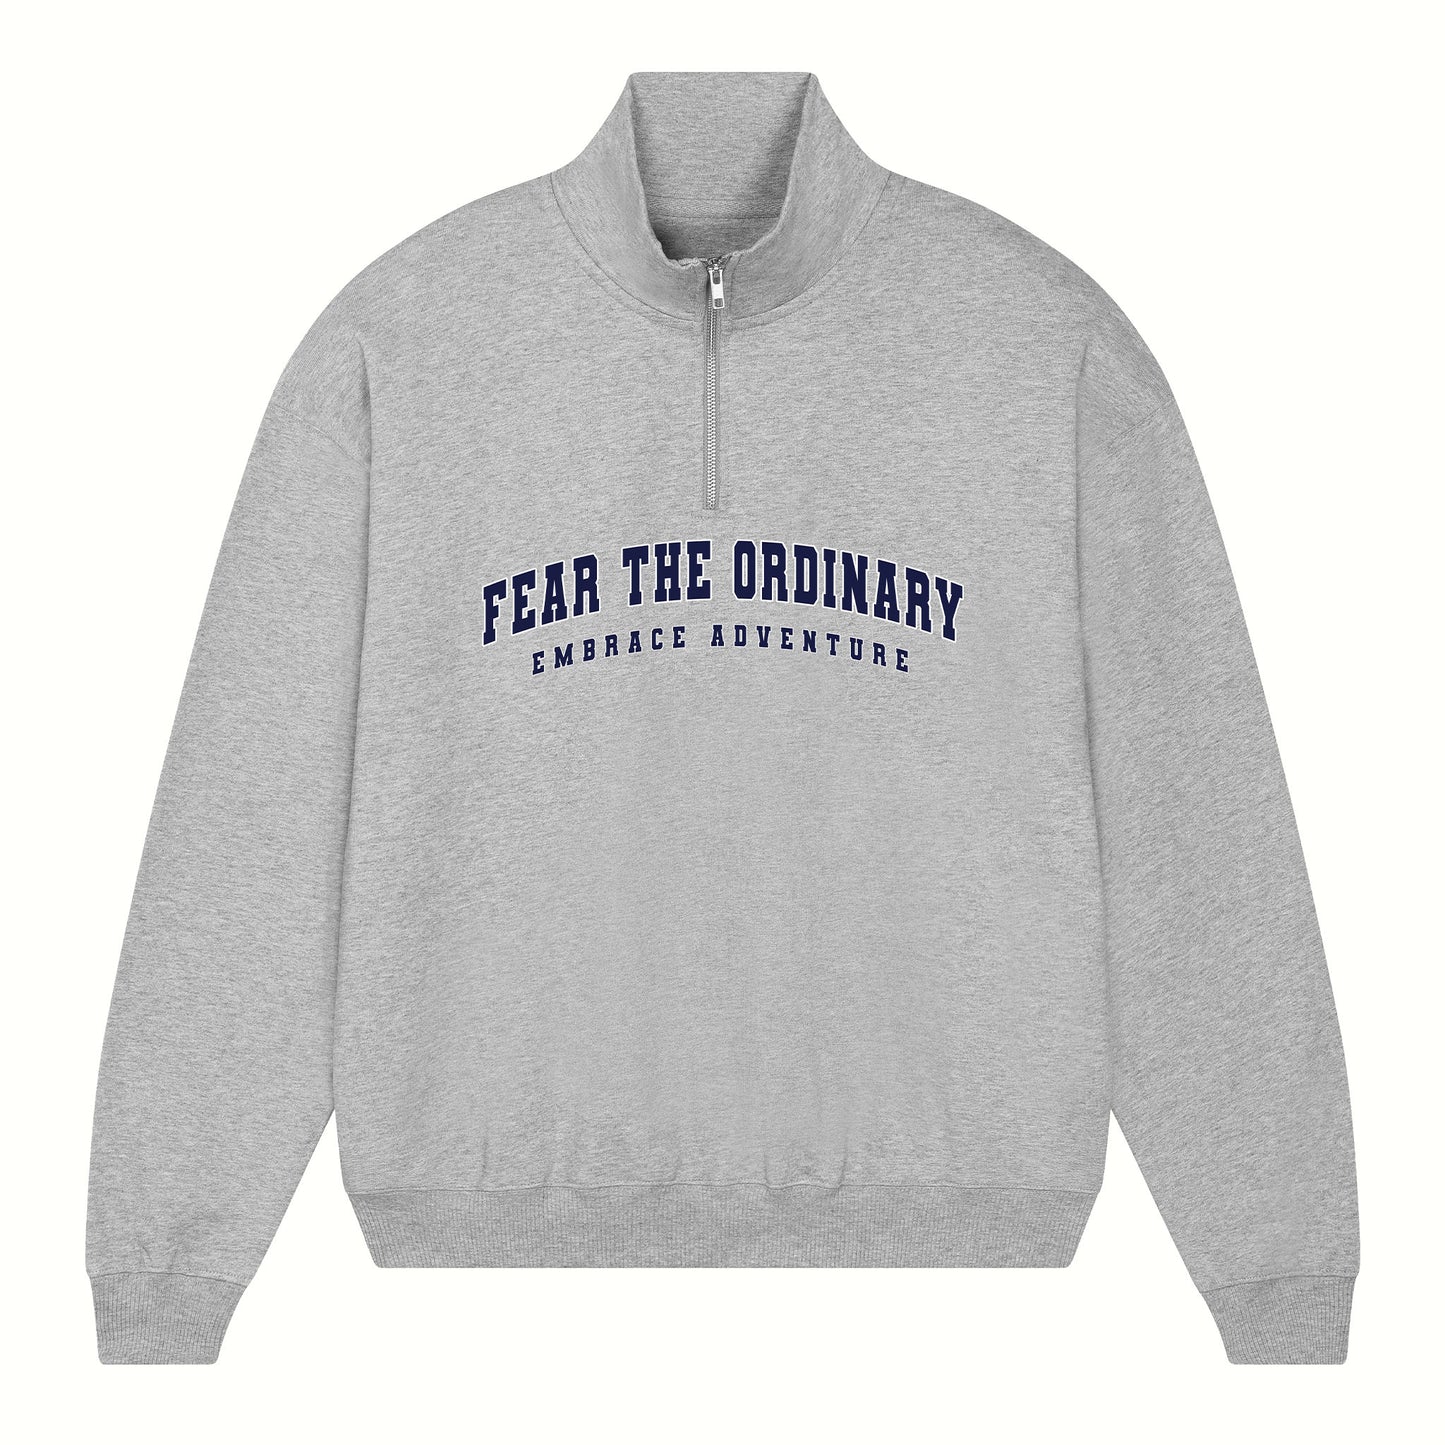 Fear the ordinary grey oversized vintage half zip sweater with blue navy embrace adventure print.